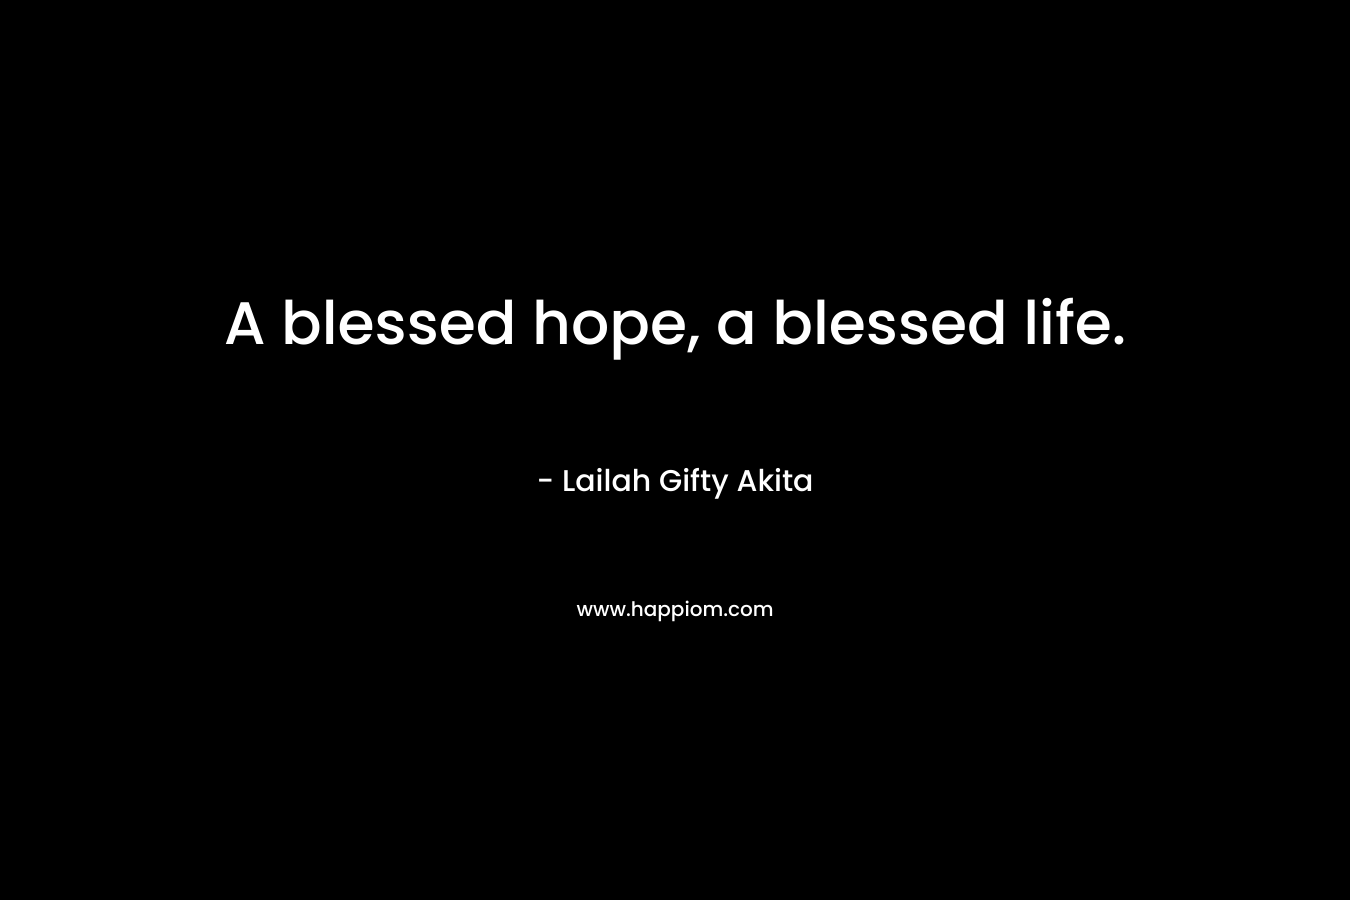 A blessed hope, a blessed life.